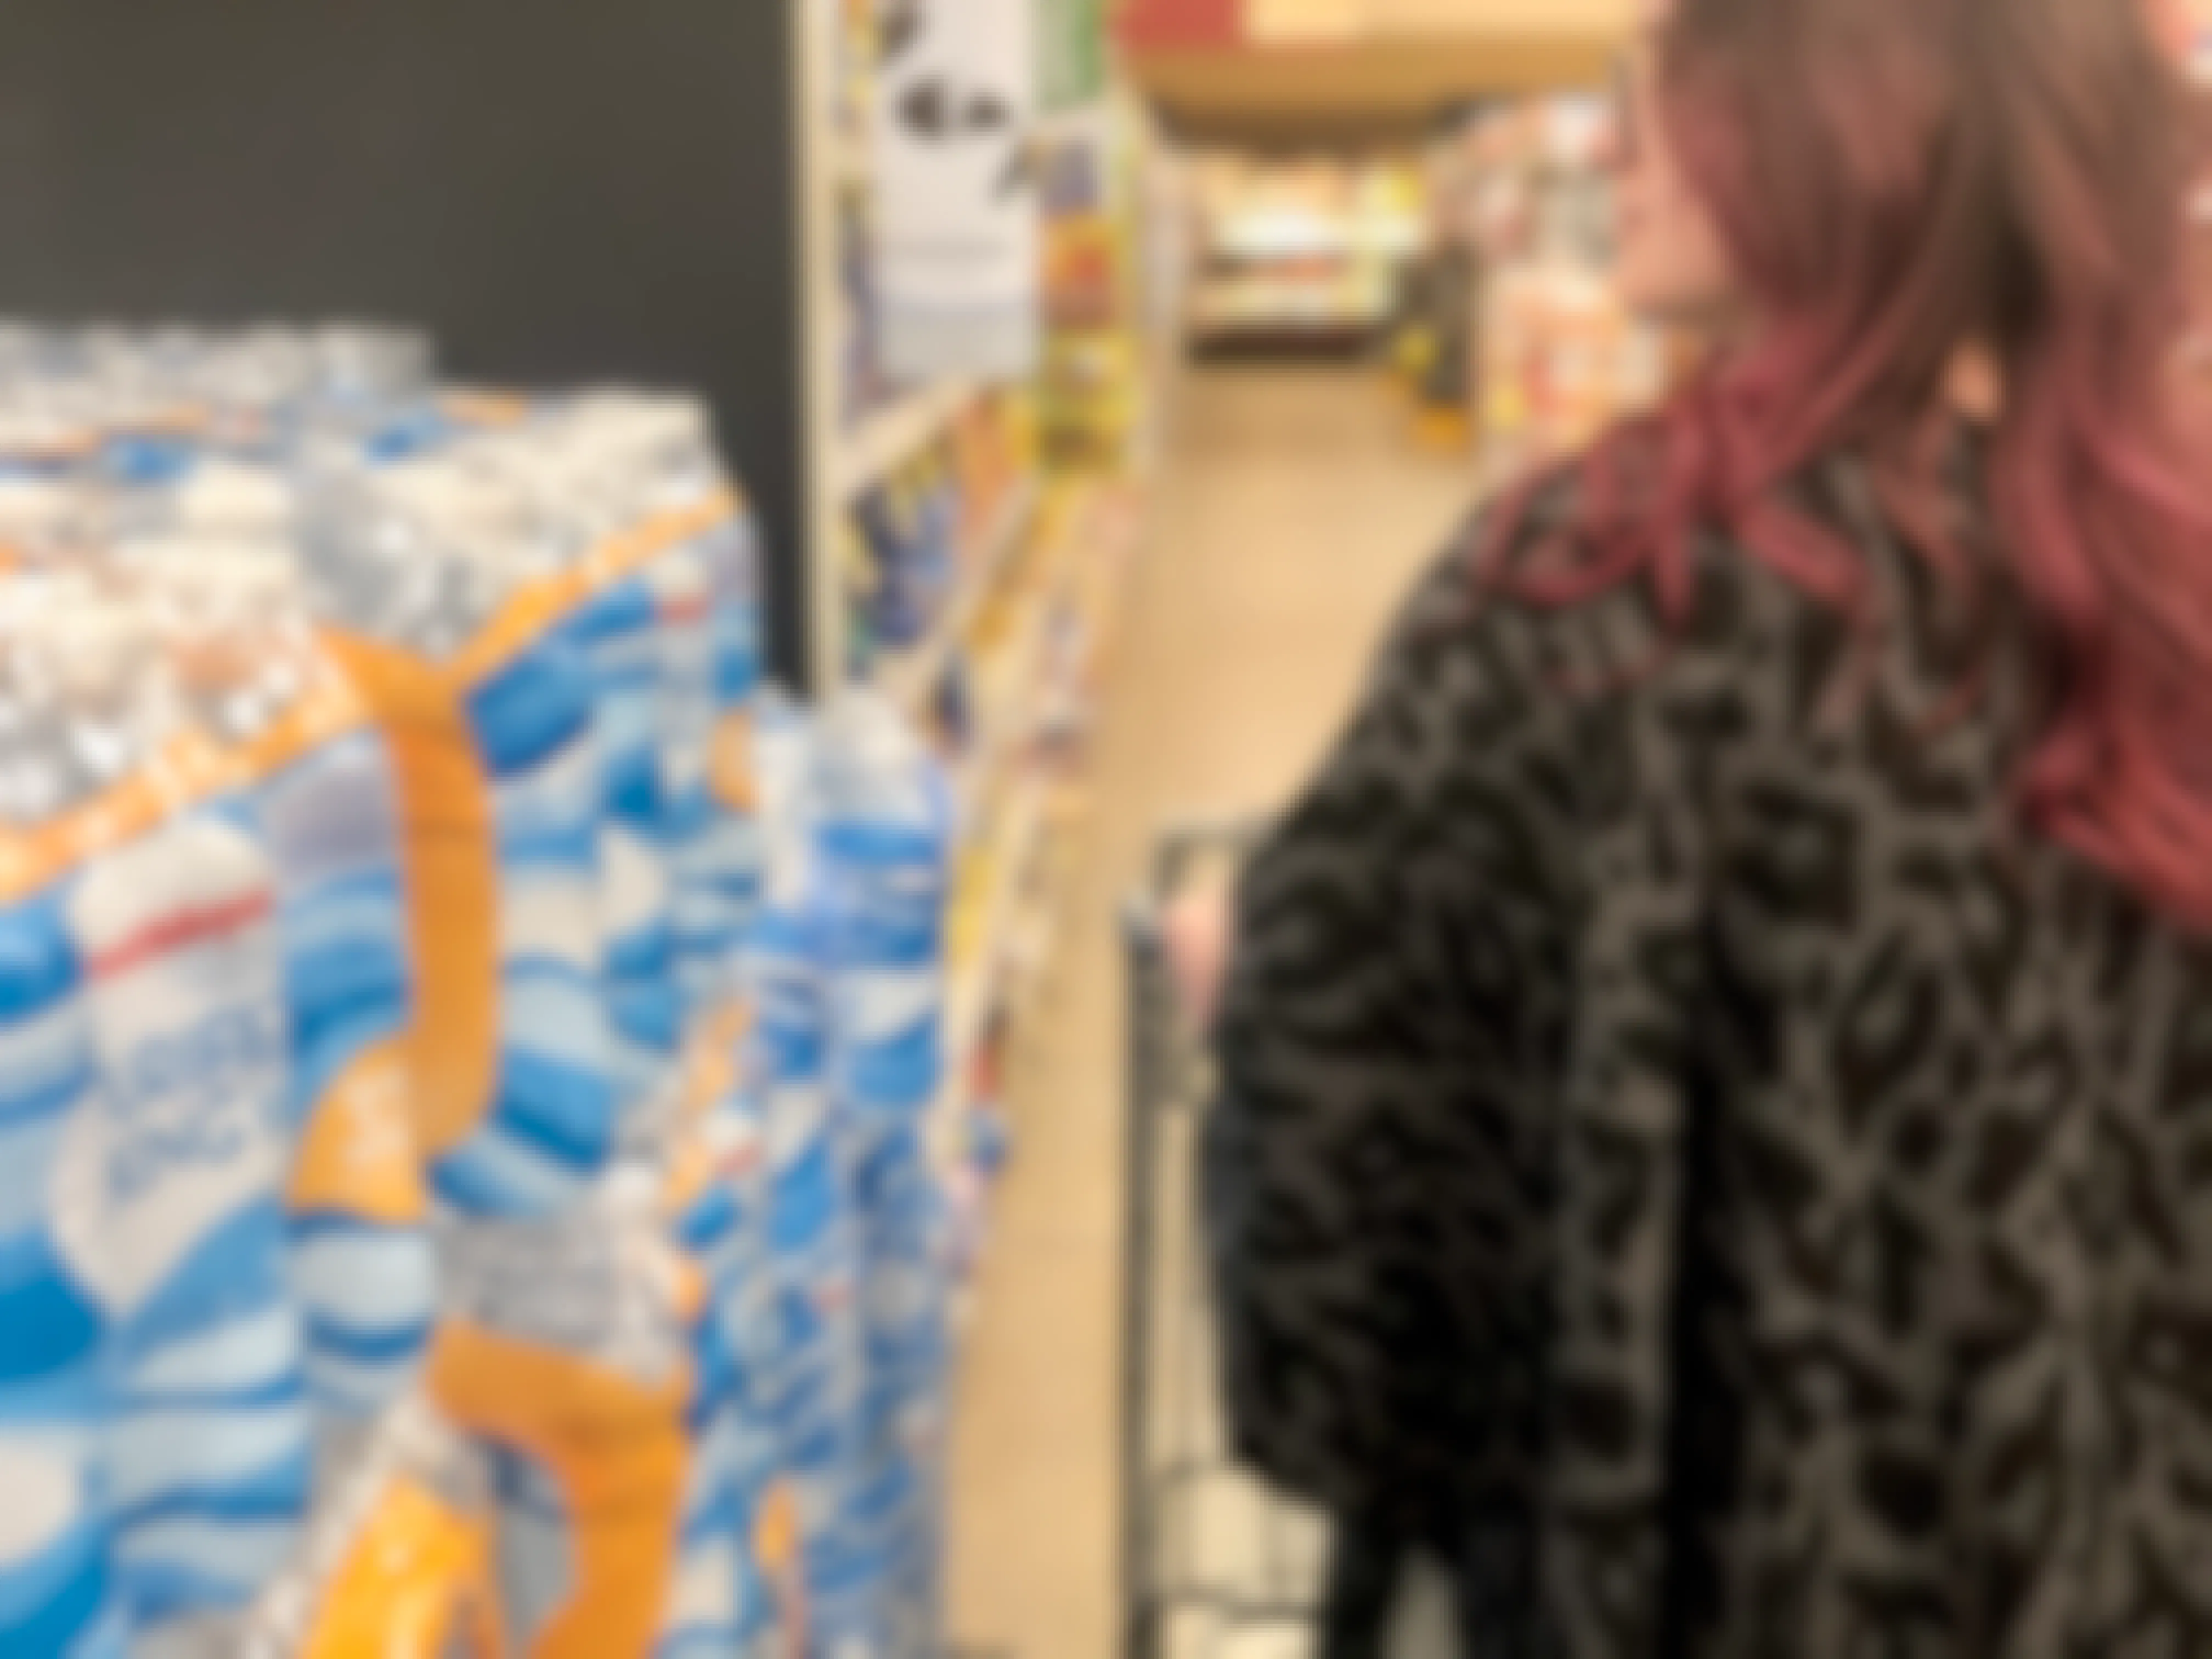 A woman passes by plastic water bottles at the store.